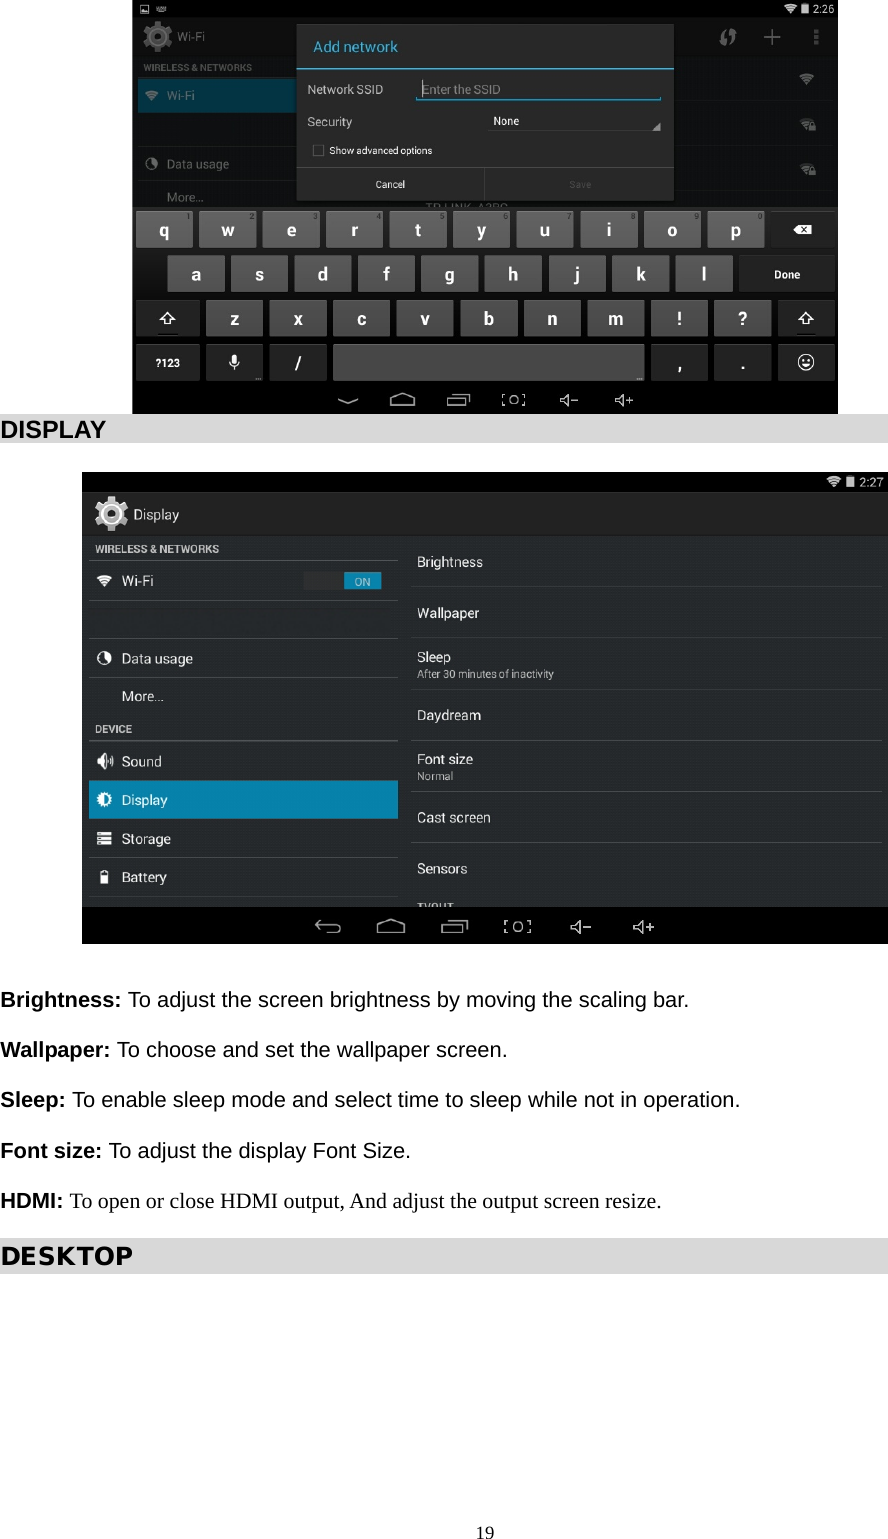   DISPLAY                                                                        Brightness: To adjust the screen brightness by moving the scaling bar.  Wallpaper: To choose and set the wallpaper screen.  Sleep: To enable sleep mode and select time to sleep while not in operation.  Font size: To adjust the display Font Size.  HDMI: To open or close HDMI output, And adjust the output screen resize.  DESKTOP                                                                           19  